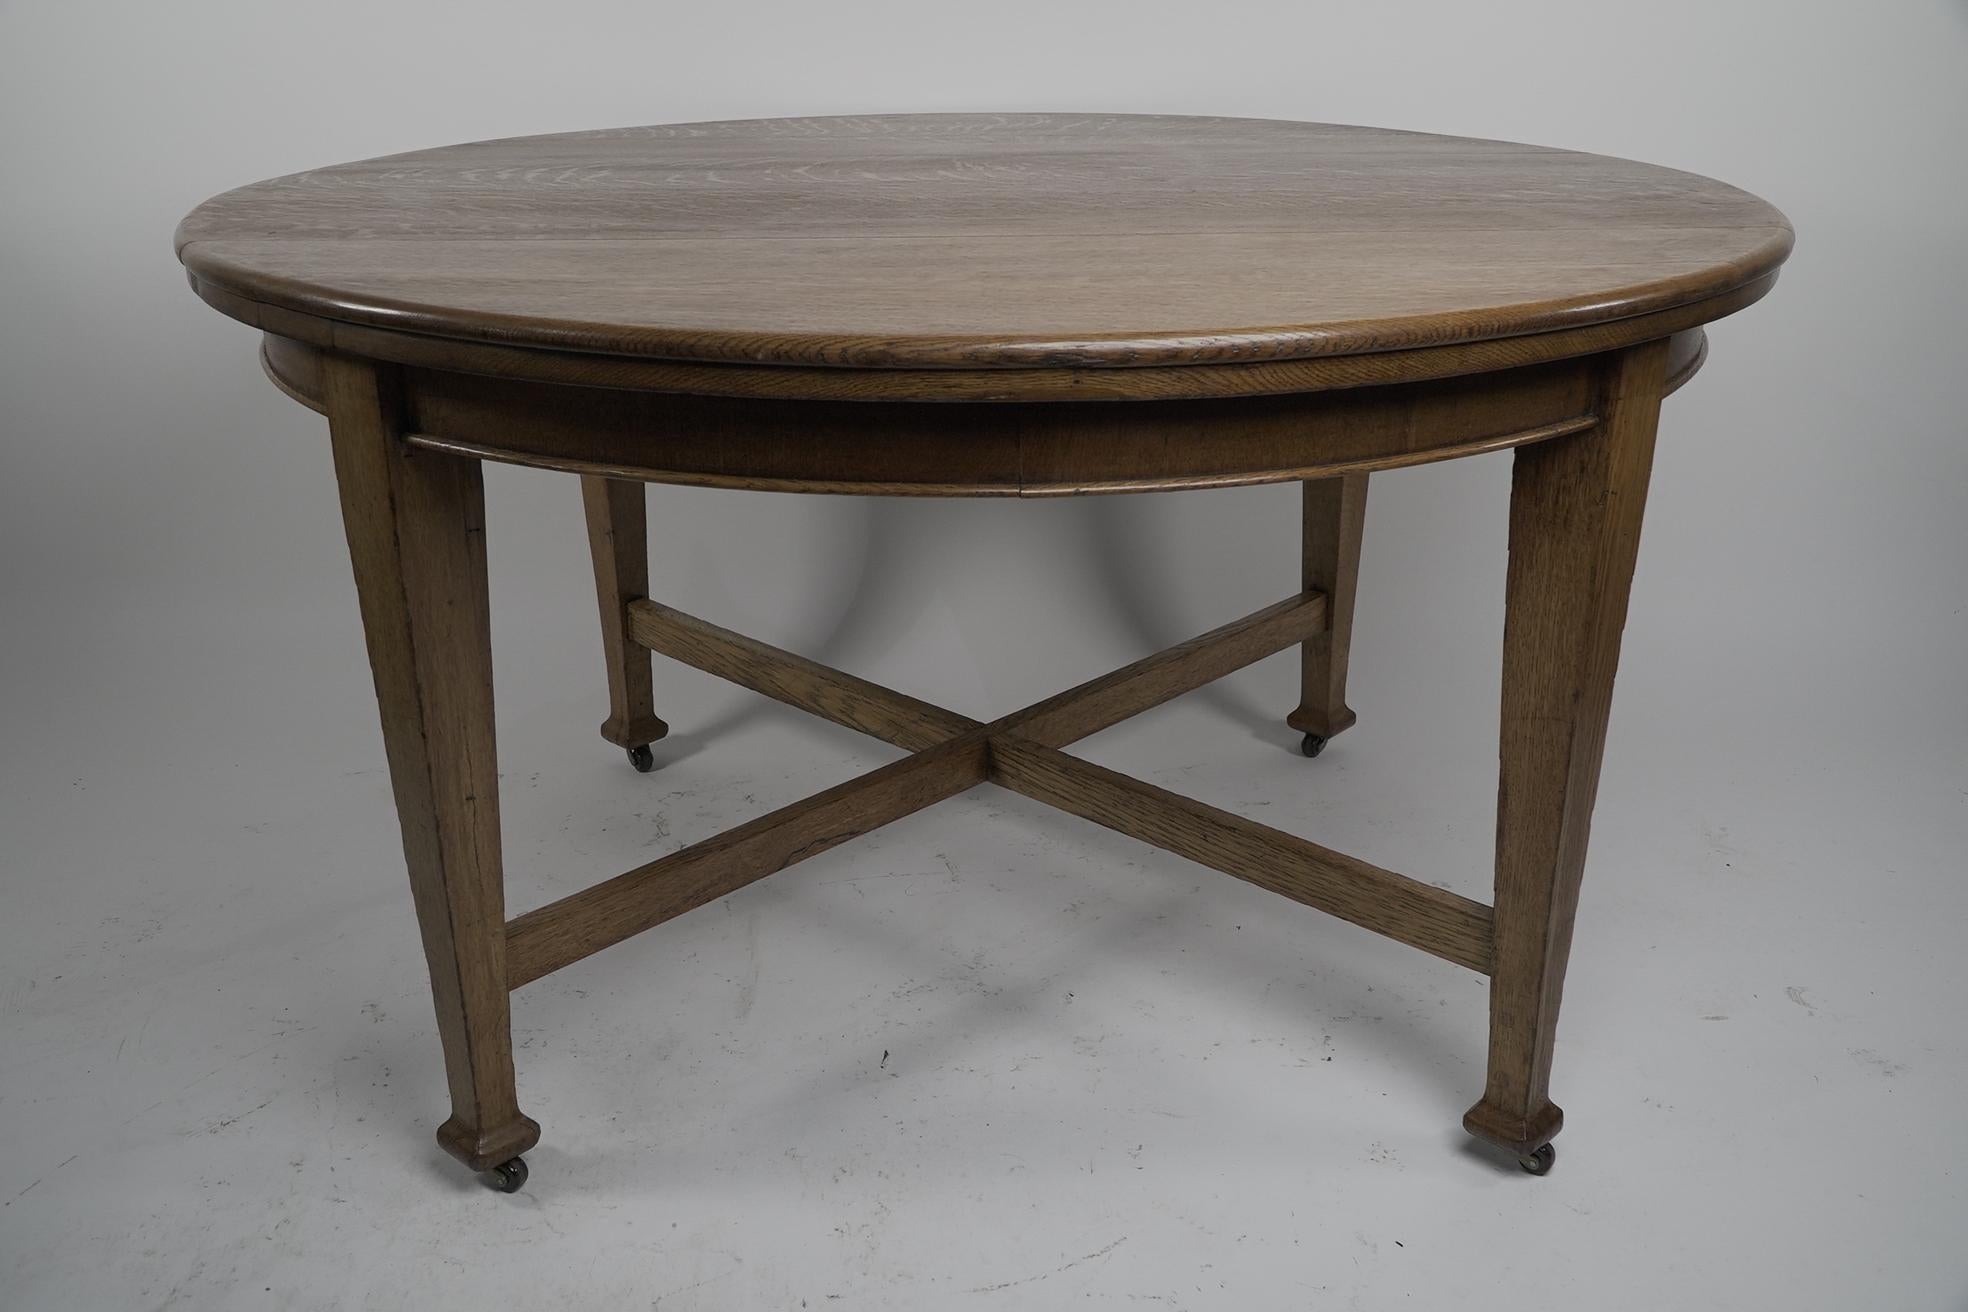 Jas Shoolbred London. An Arts and Crafts round oak dining table with square tapering legs united by a cross stretcher. Jas Shoolbred company disc attached underneath the table top.